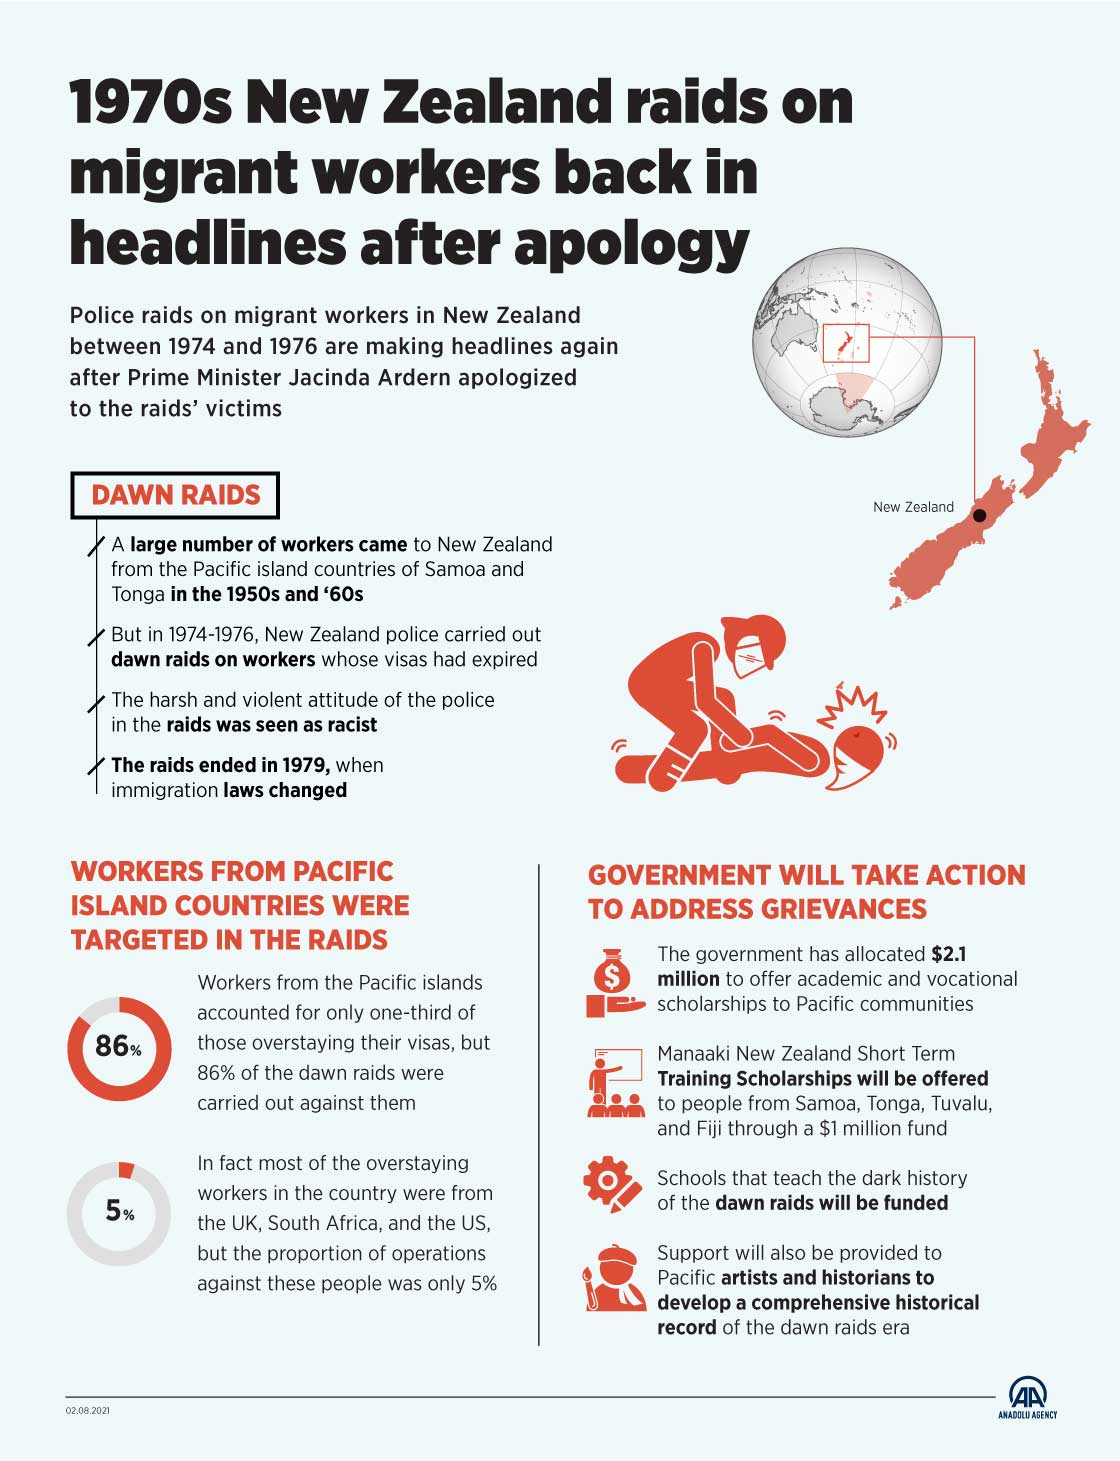 1970s New Zealand raids on migrant workers back in headlines after apology